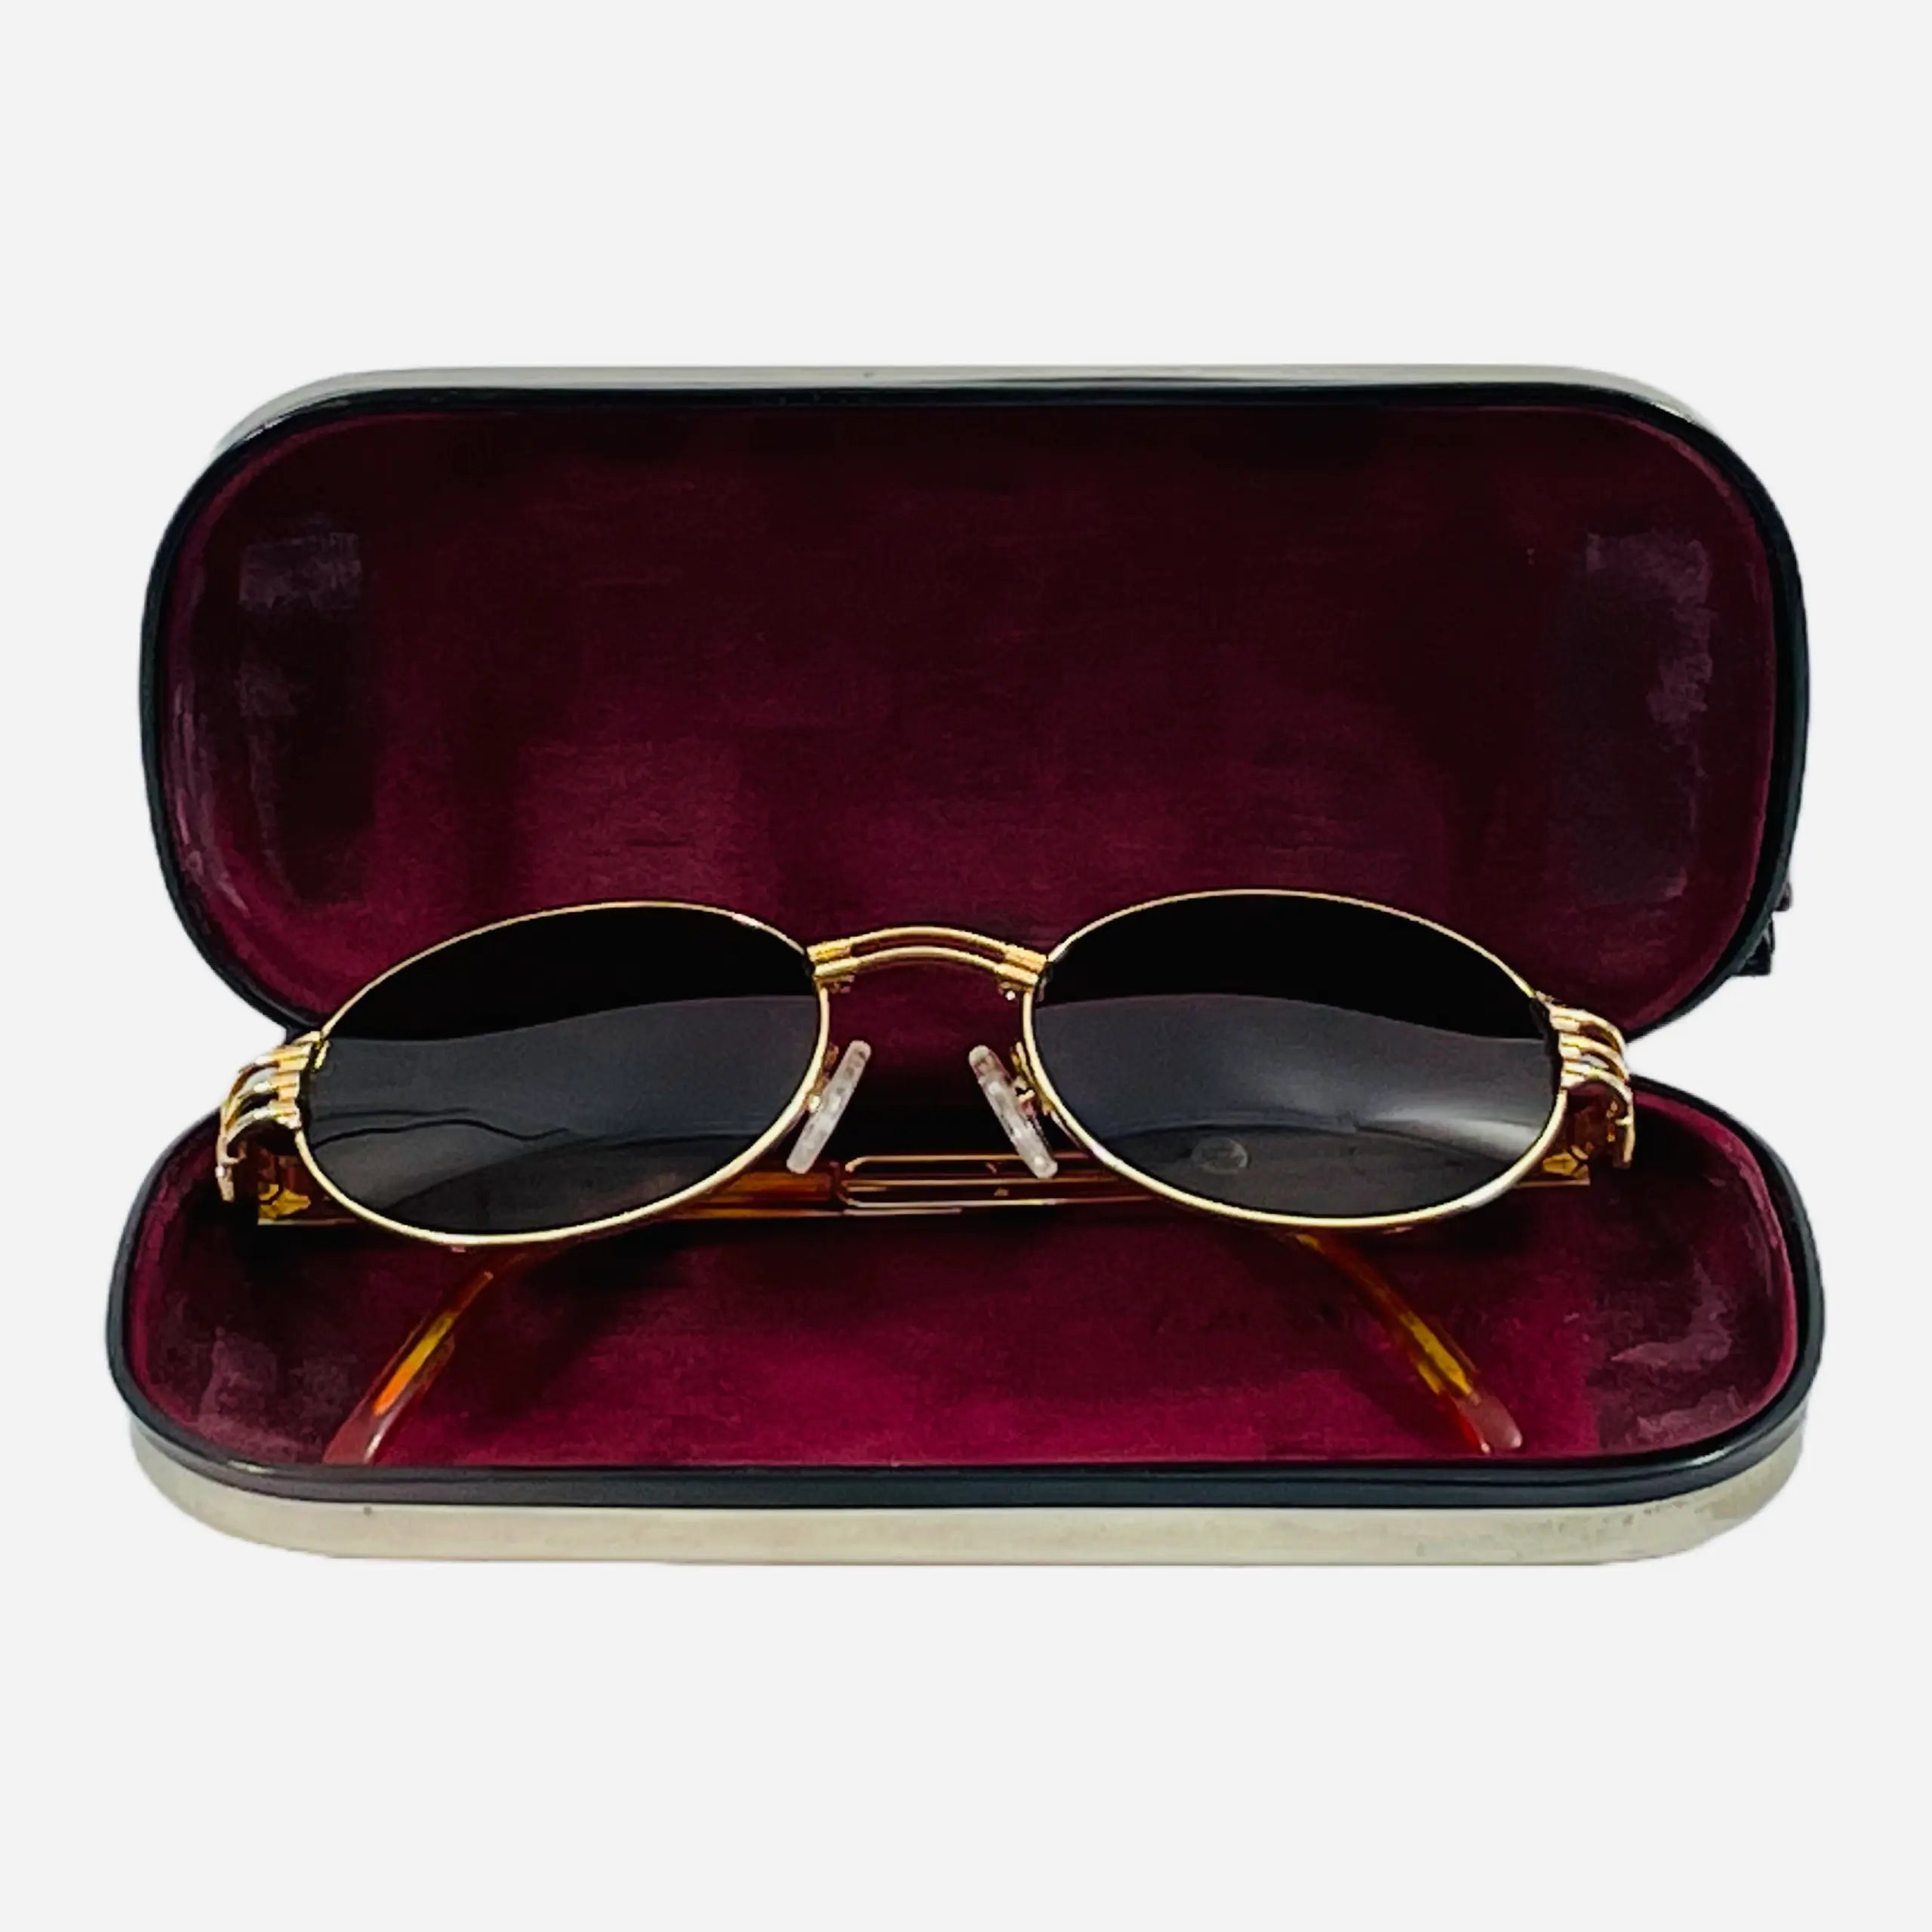 The Migos wears Depuis 1924 Vintage YSL and Gaultier sunglasses at 